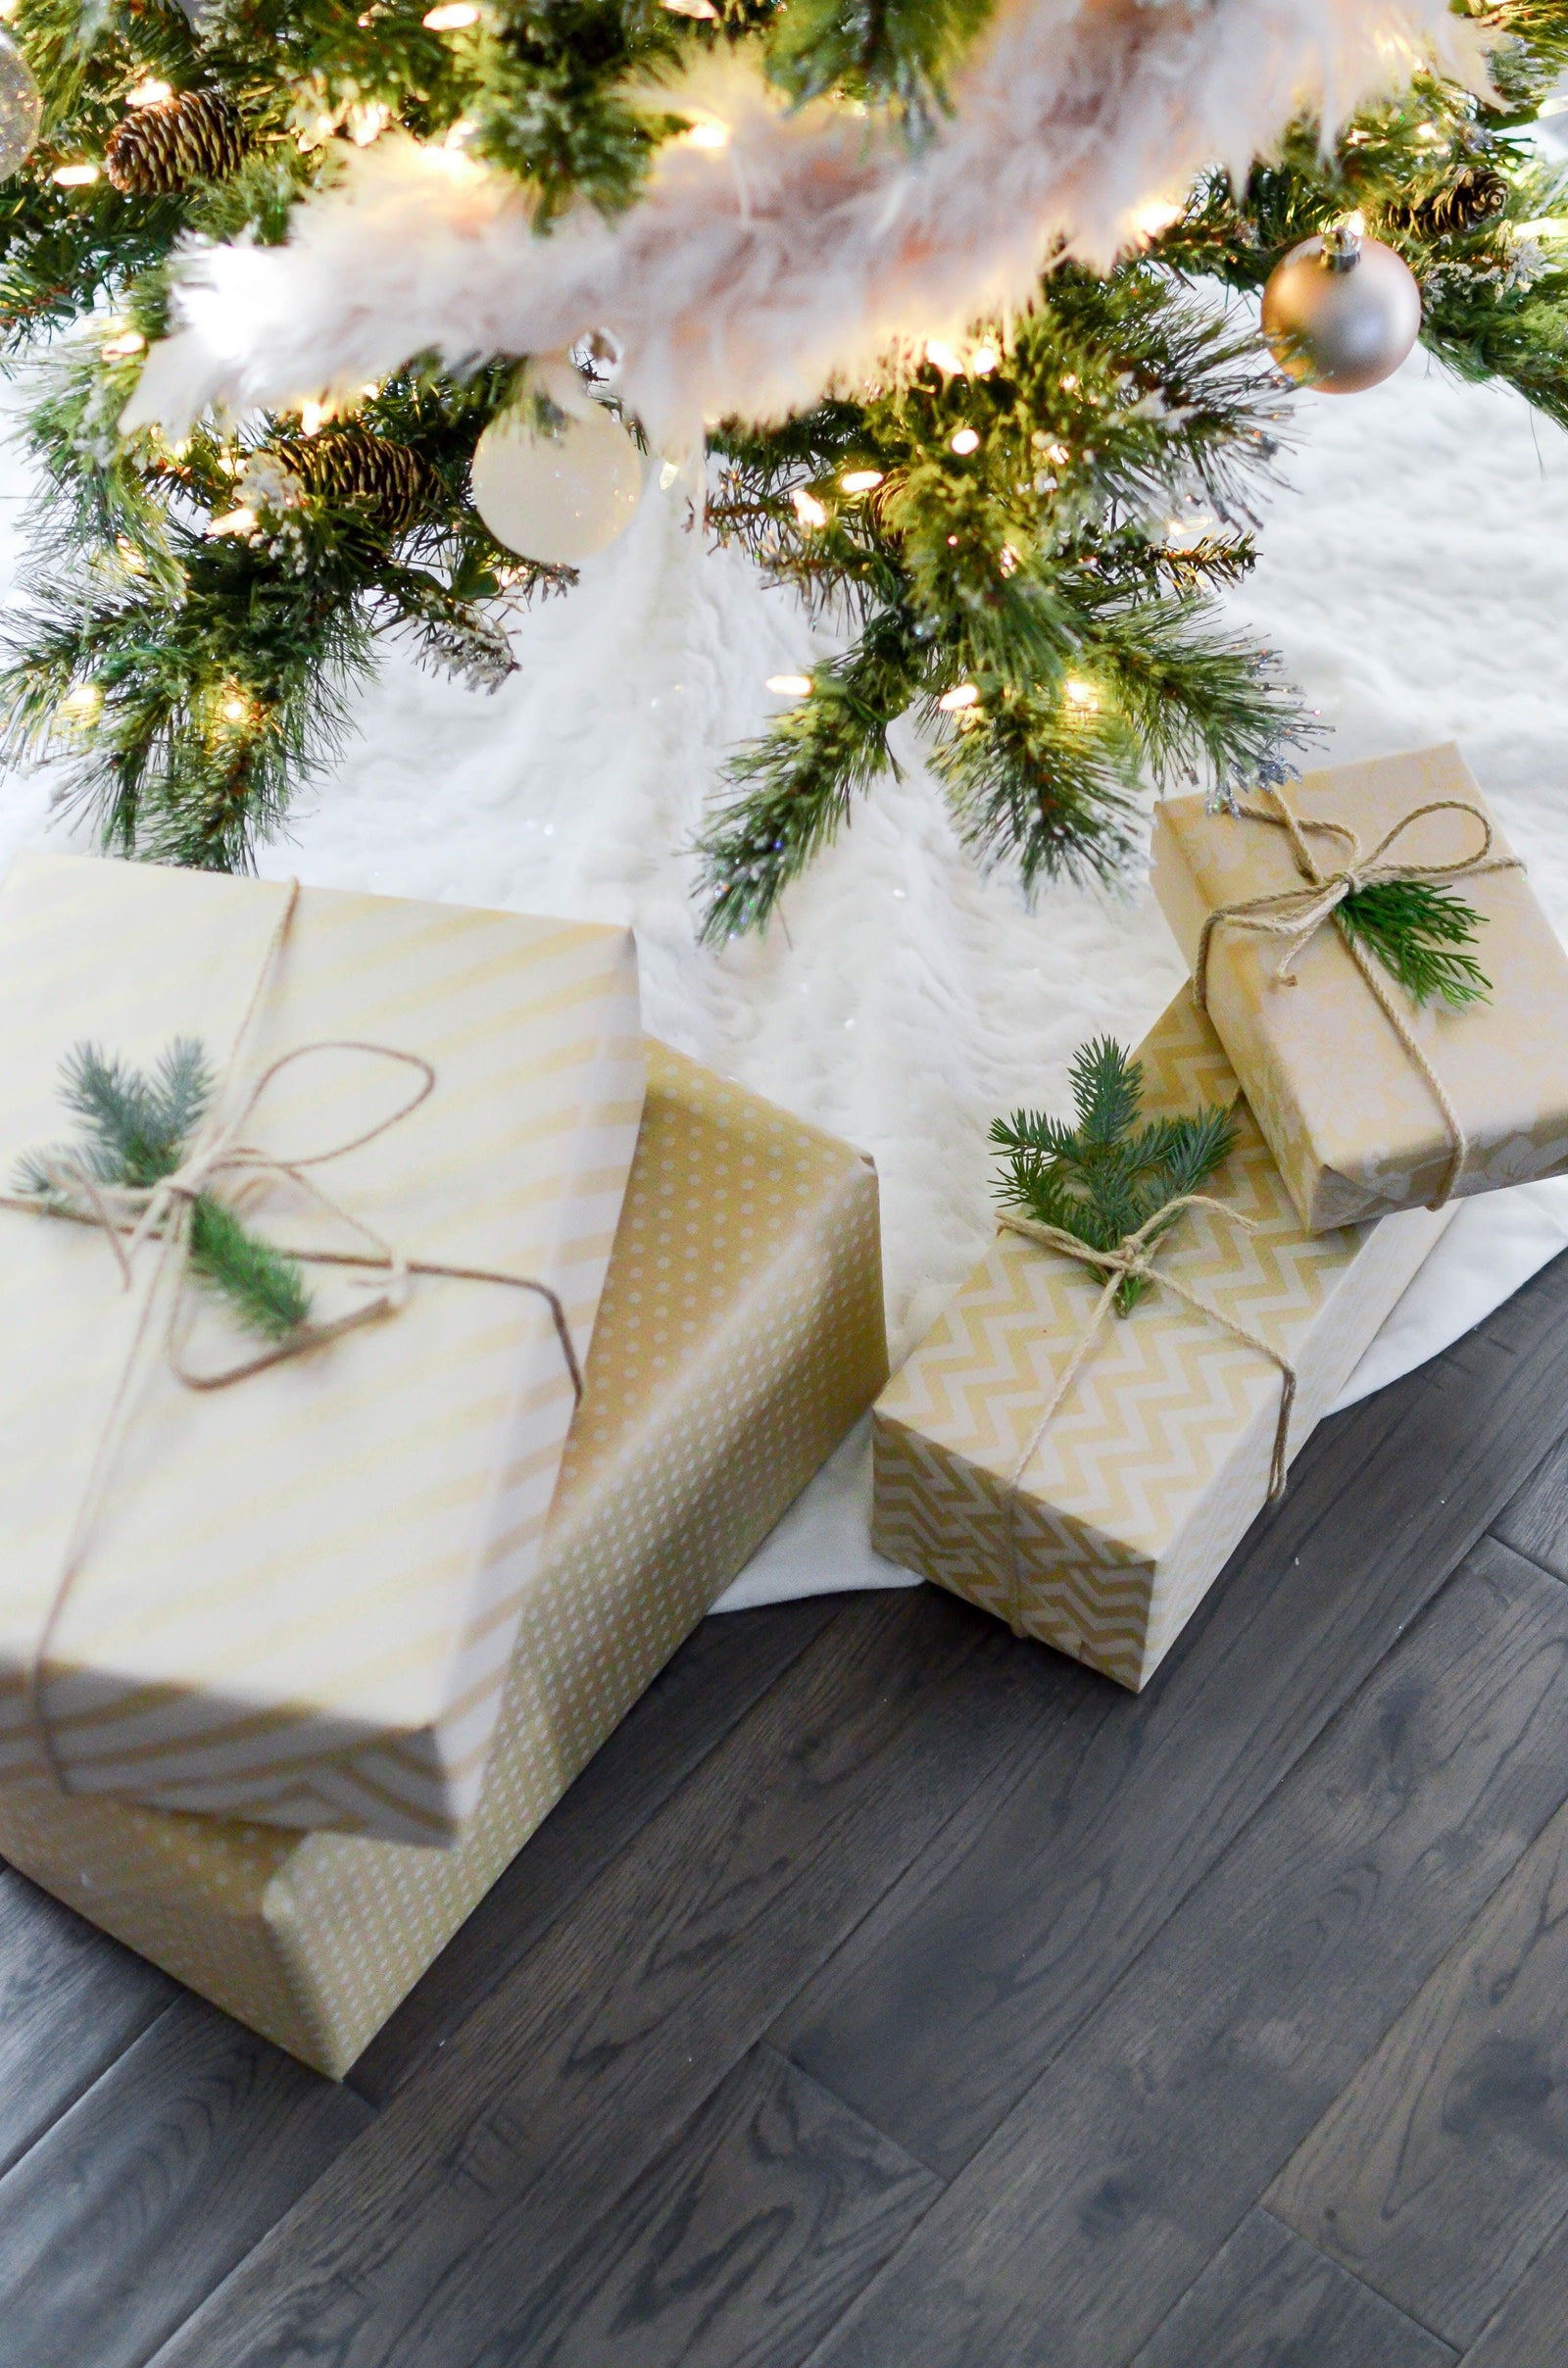 Green Gift Guide: Our Tips for a More Sustainable Holiday Shopping List - LOMA RETAIL